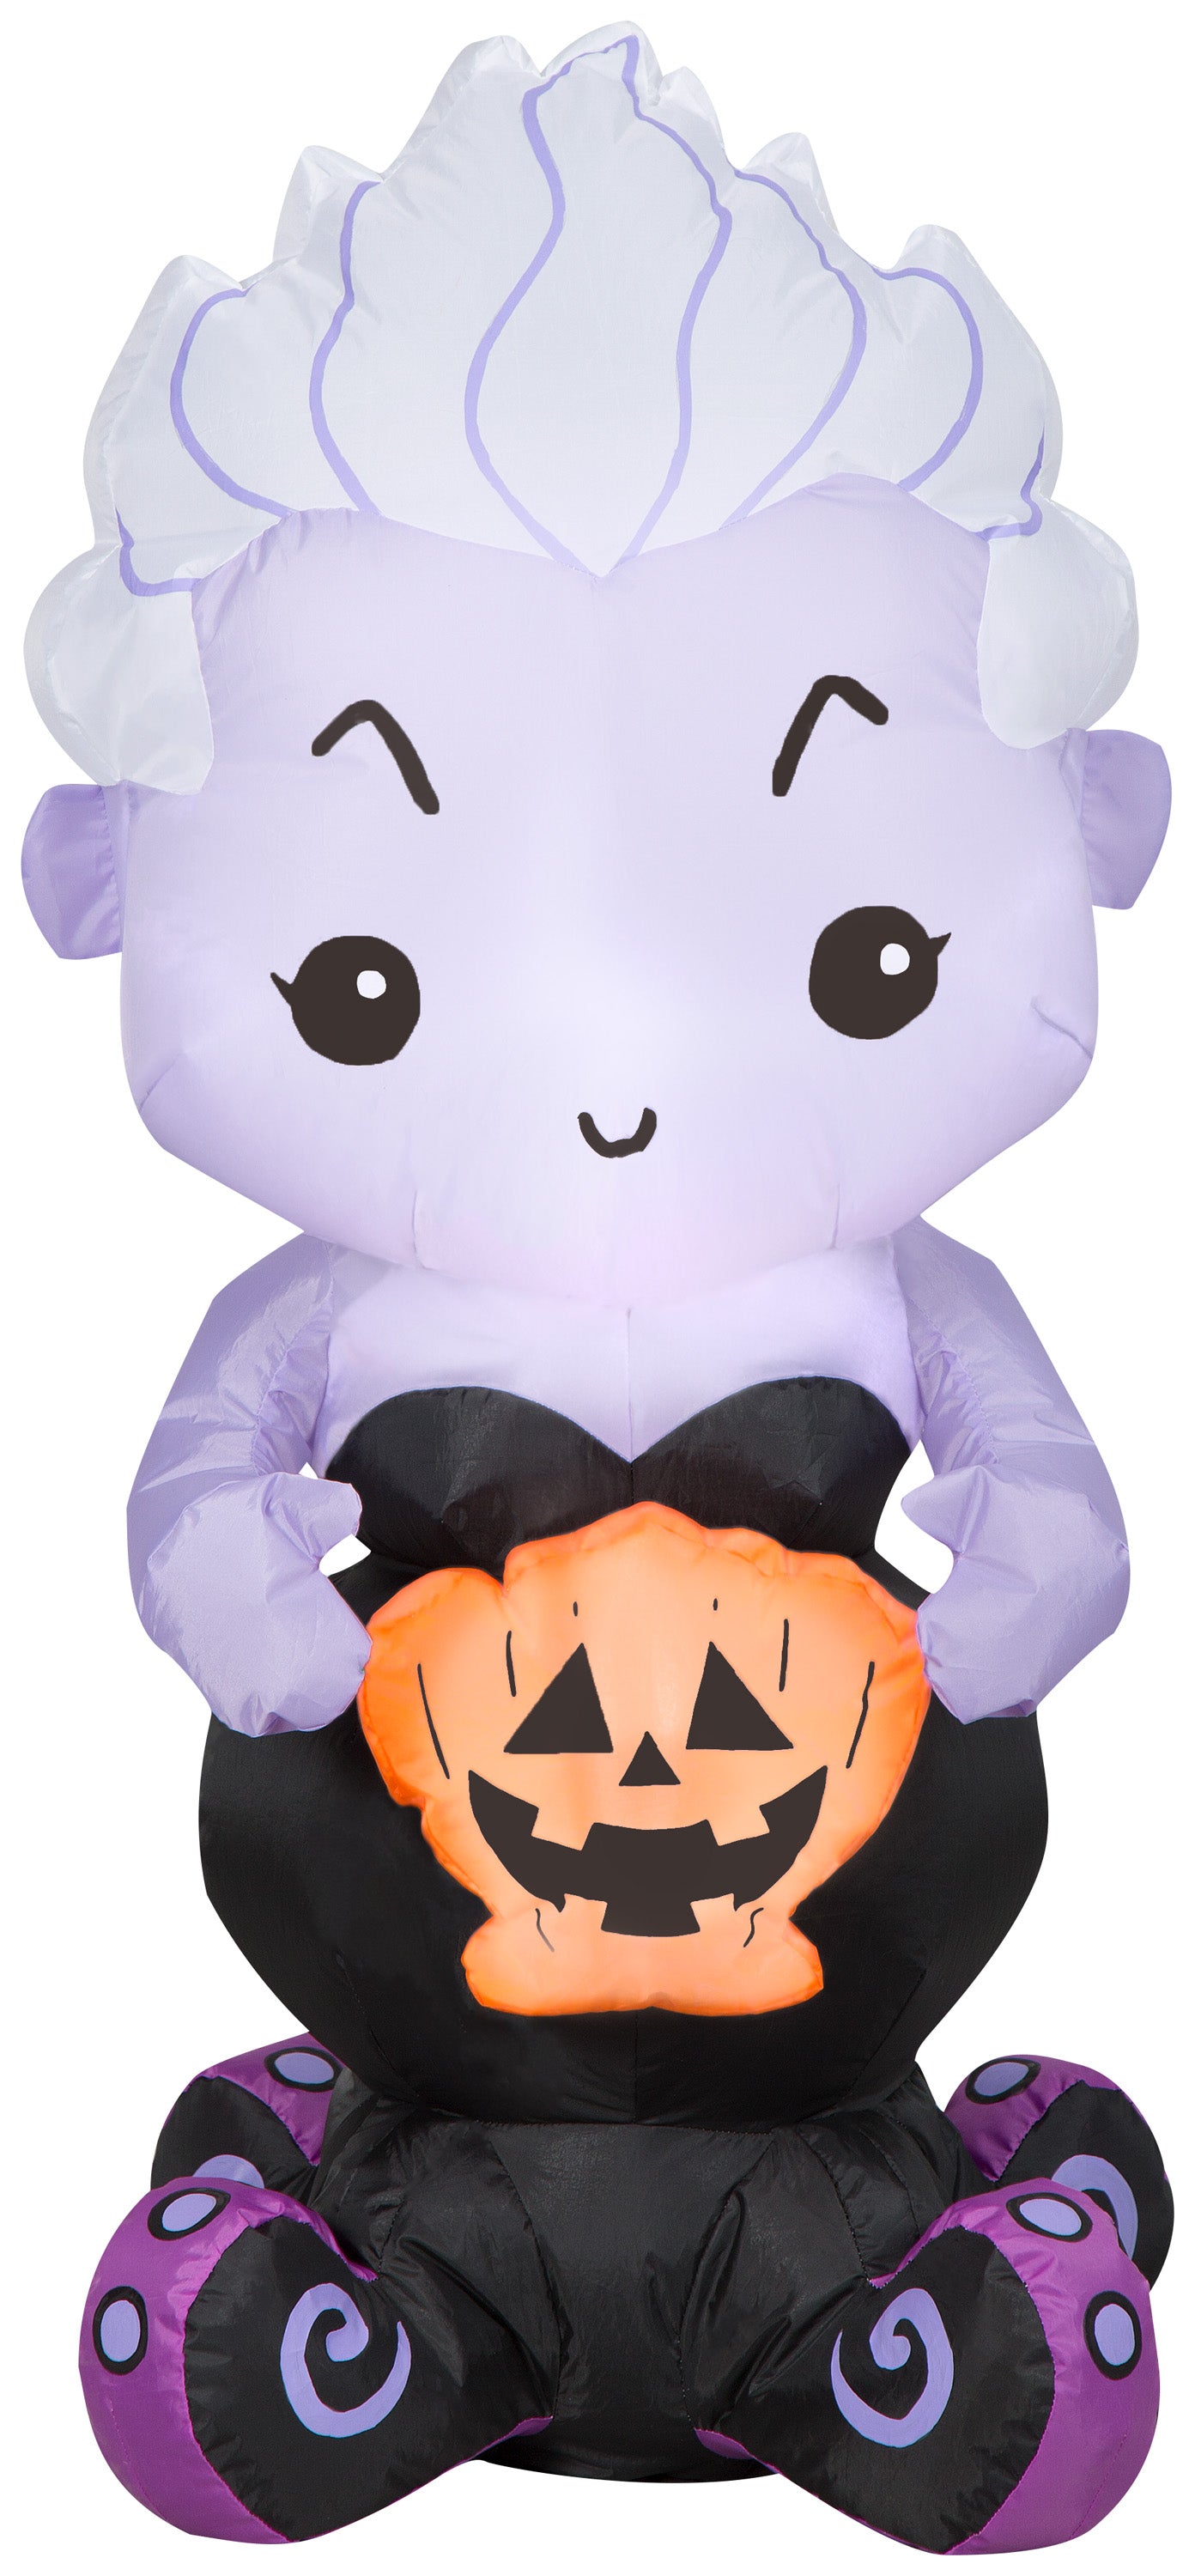 Gemmy Airblown Inflatable Ursula, 3.5 ft Tall, White